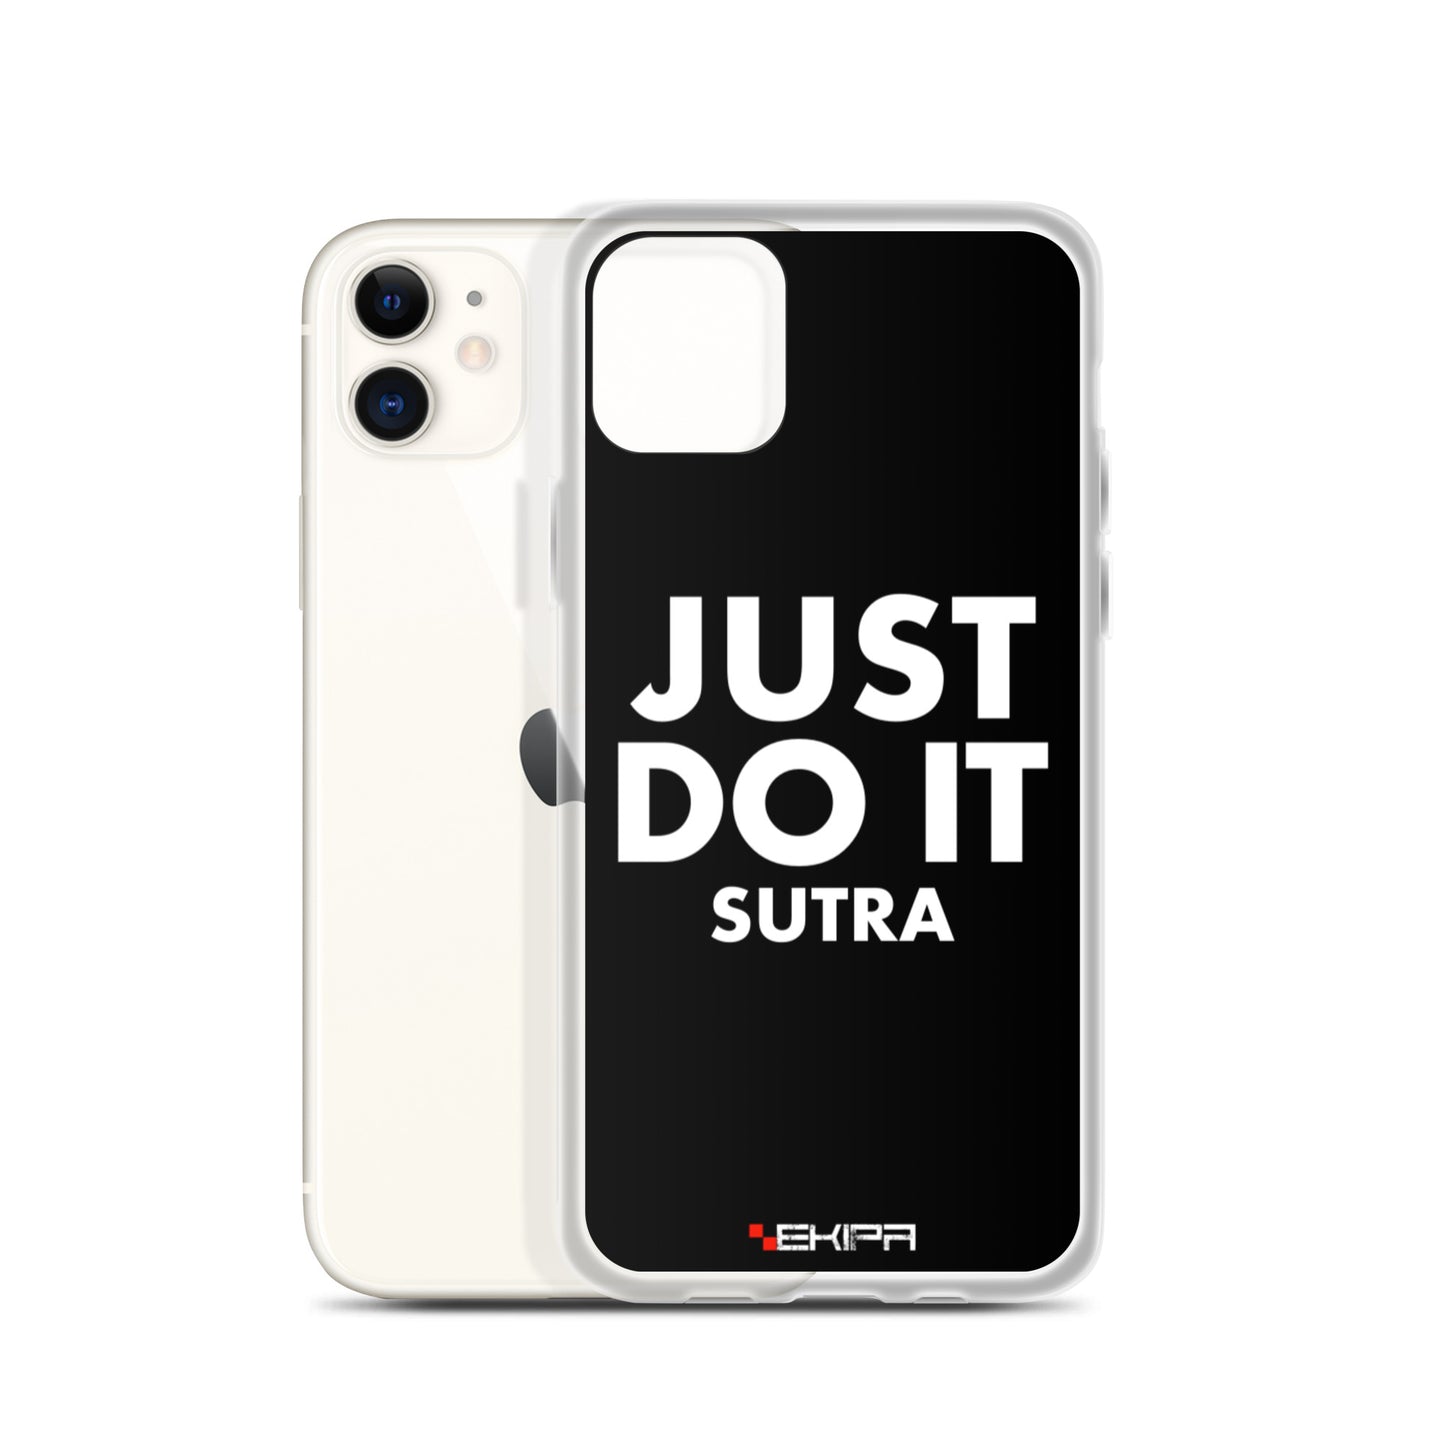 "Just do it sutra" - iPhone Hülle